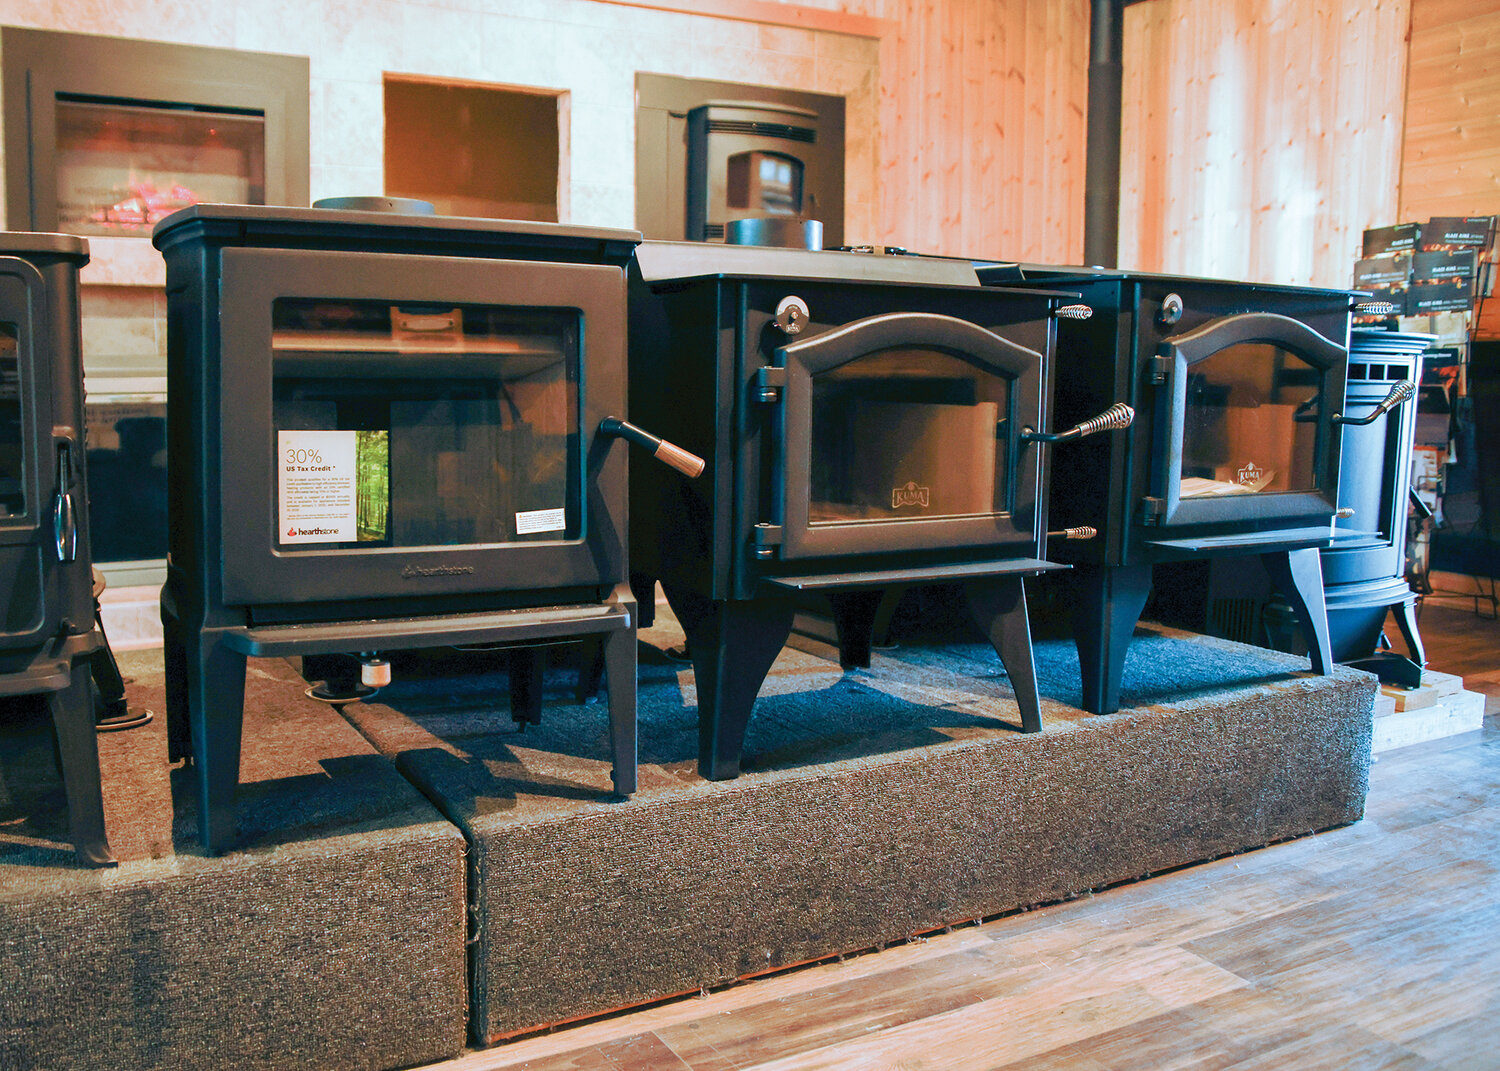 With state and federal regulations, wood and pellet stoves have become more efficient and better for the environment.